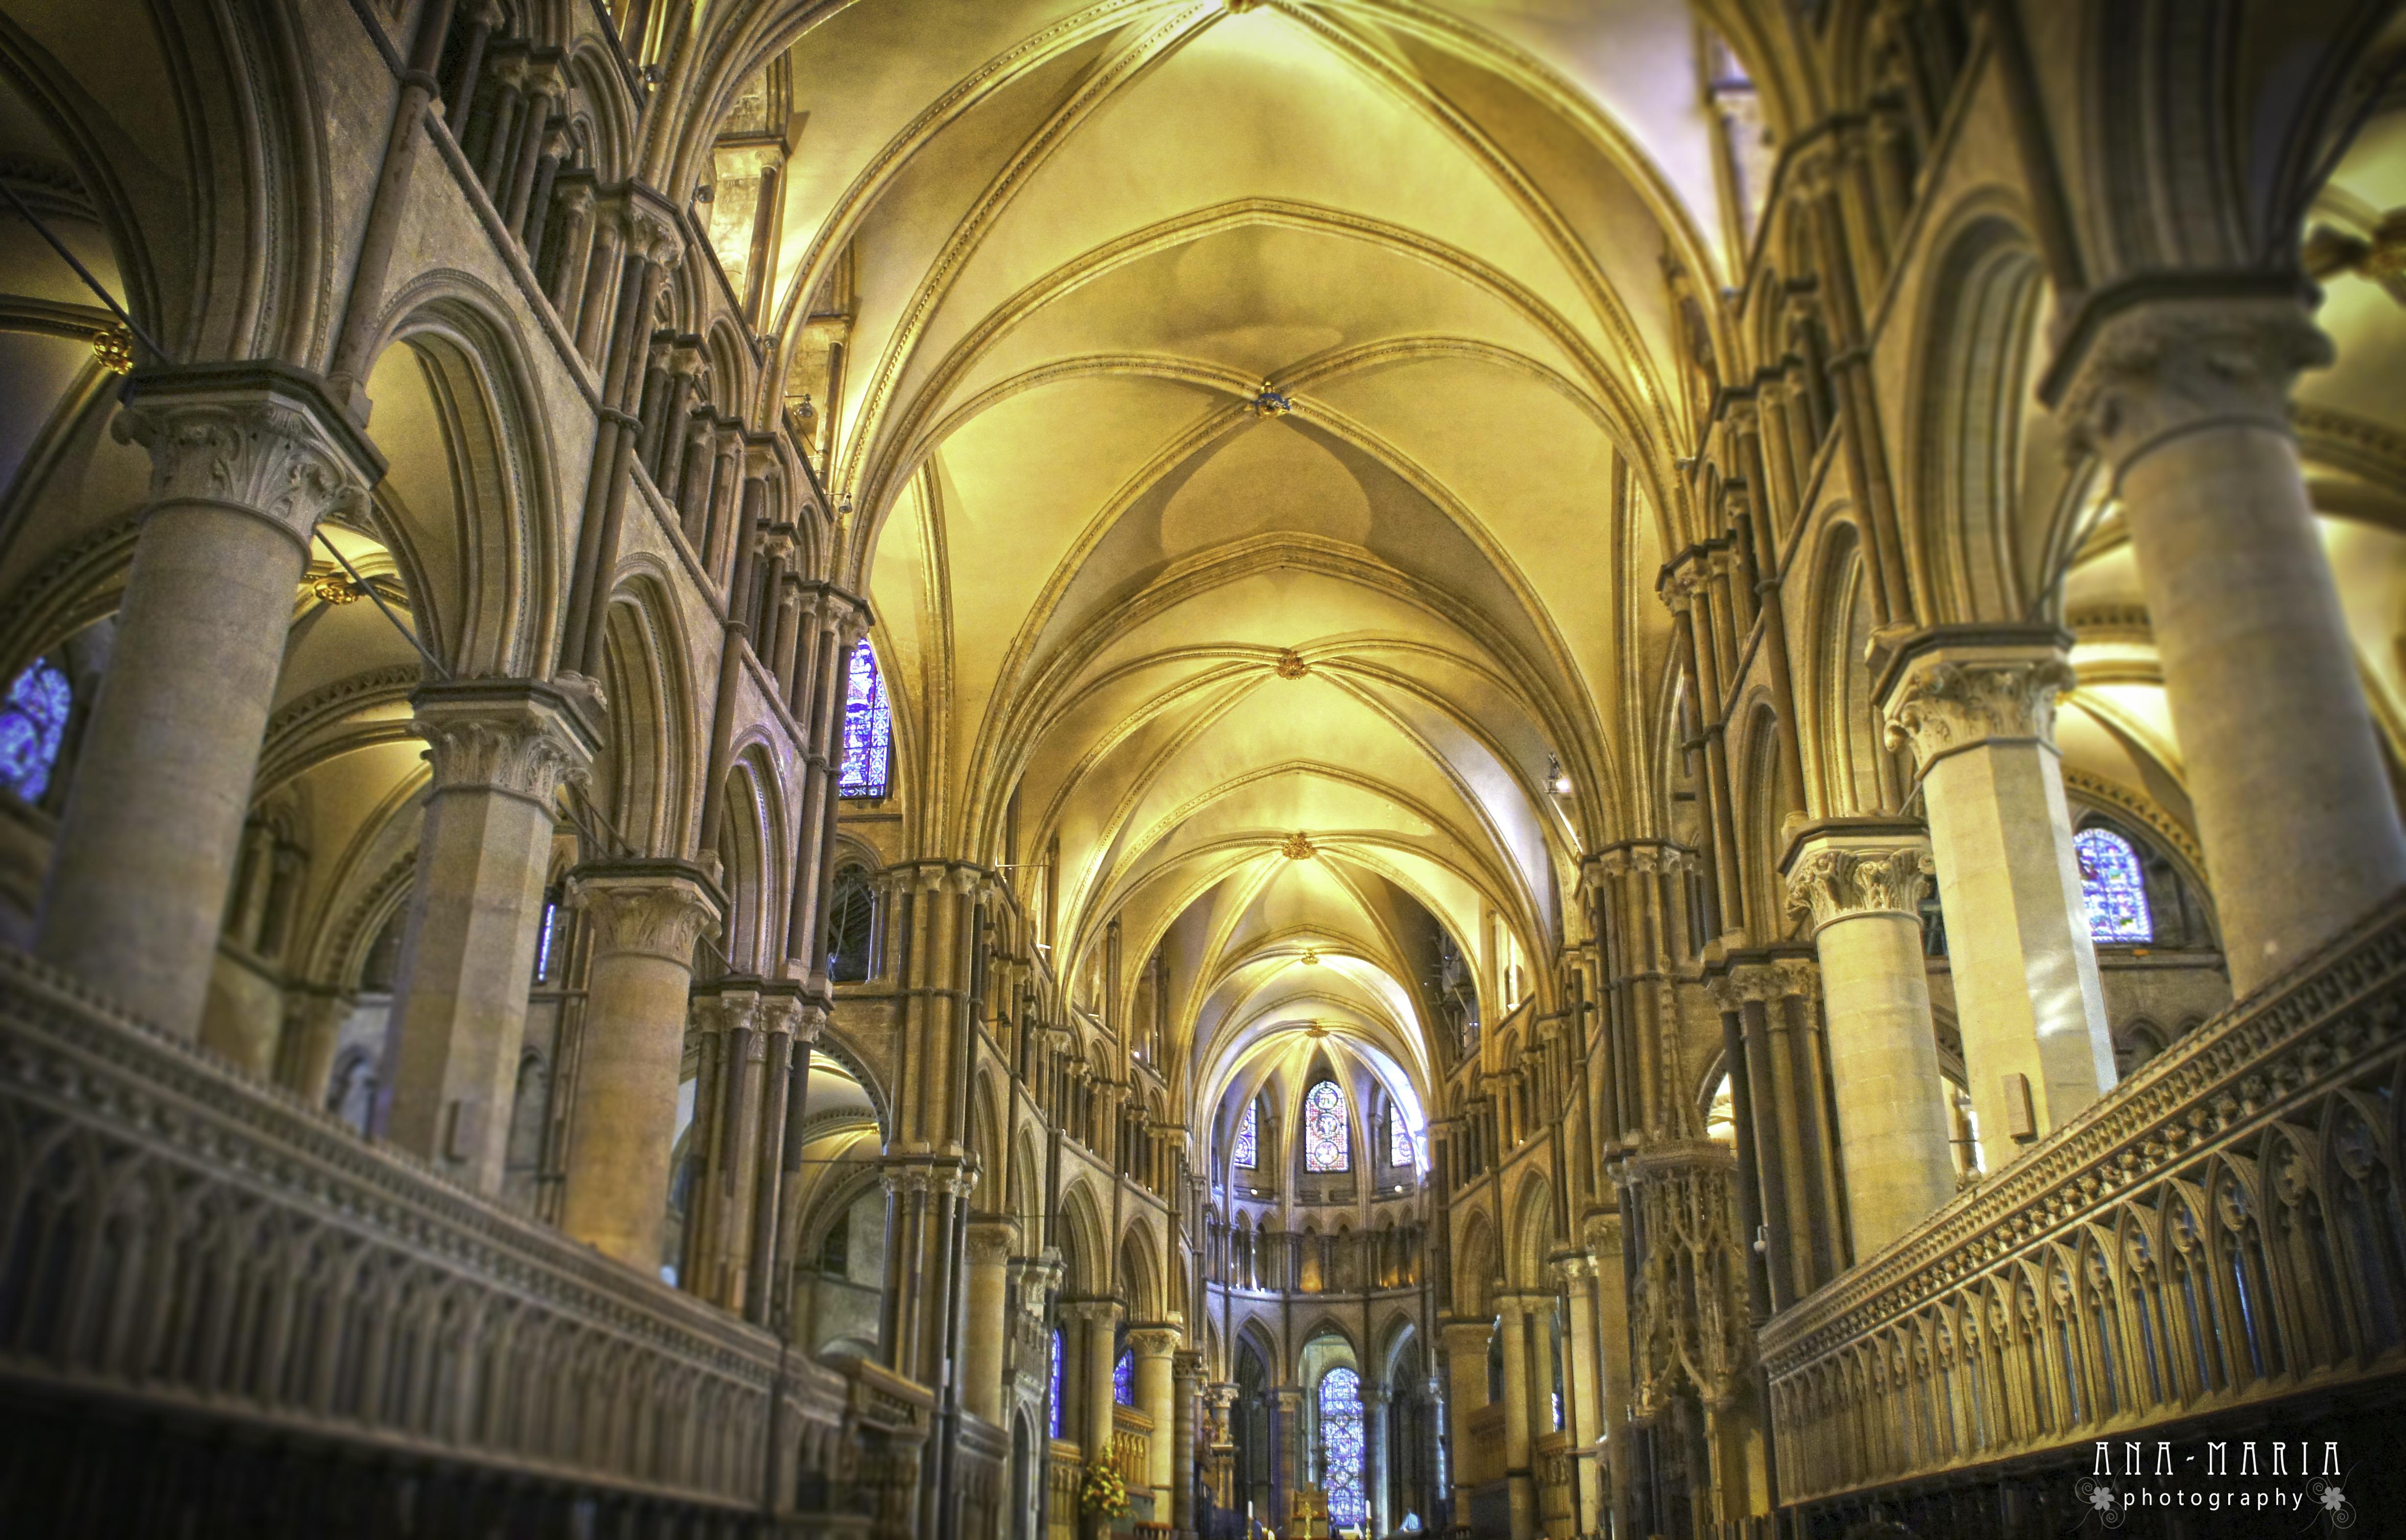 Altar Arch Architecture Canterbury Cathedral Cathedral Columns Religious 4912x3144